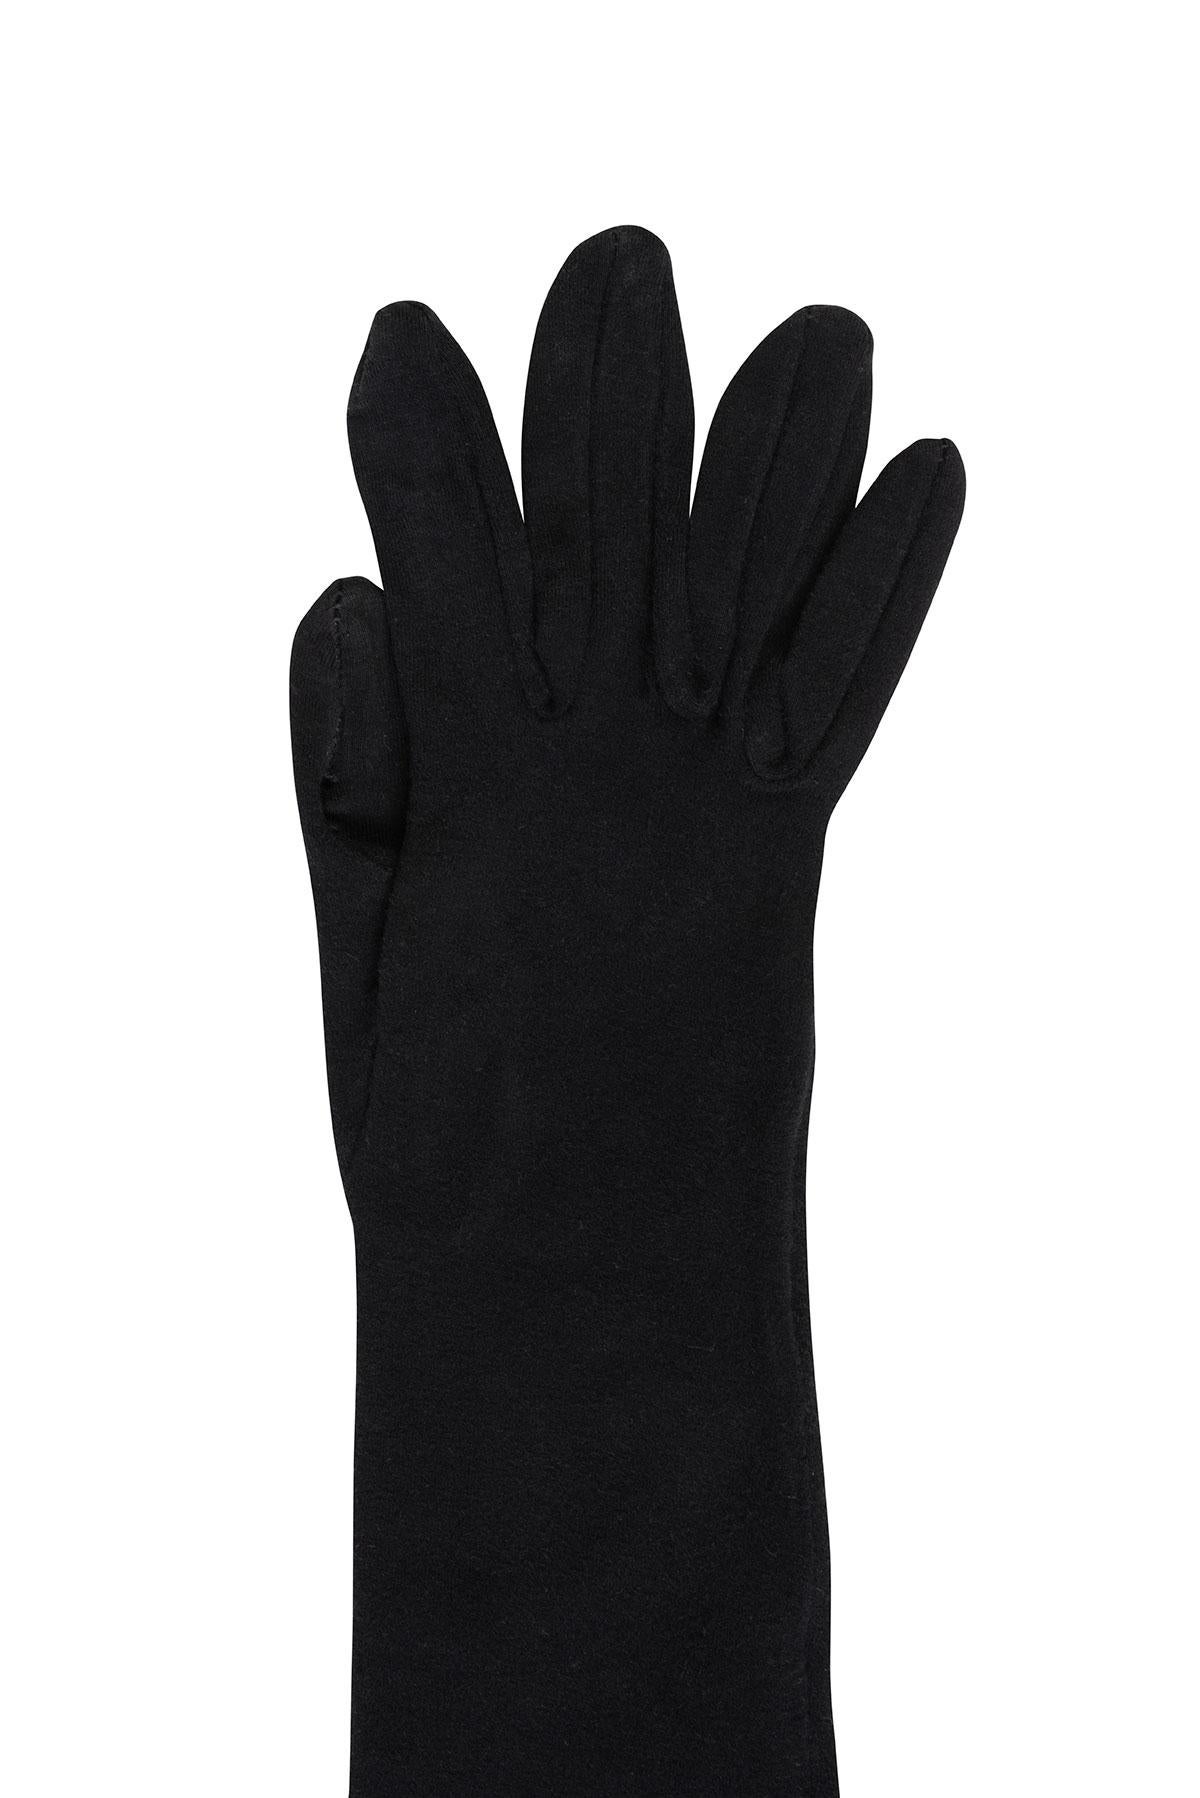 DOLCE & GABBANA 90'S Iconic Stretched Long Gloves For Sale 1